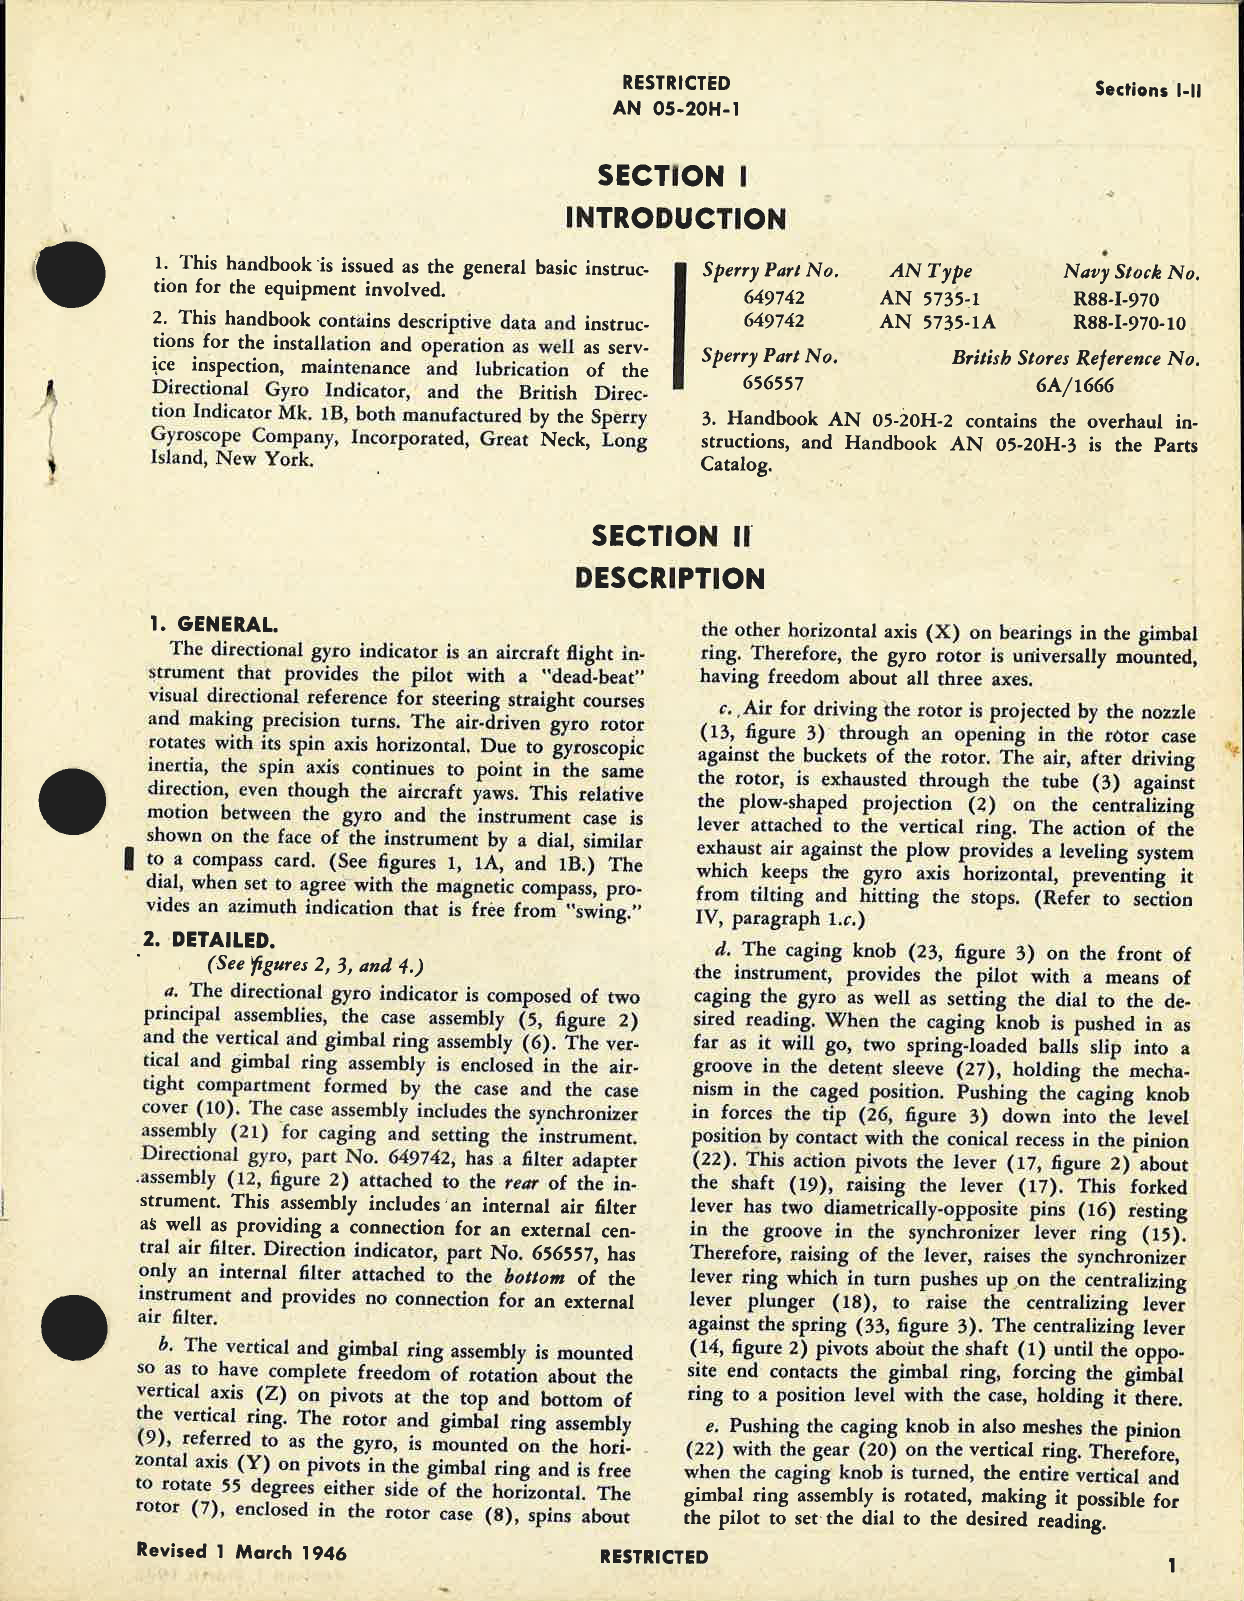 Sample page 5 from AirCorps Library document: Operation and Service Instructions for Directional Gyro Indicators